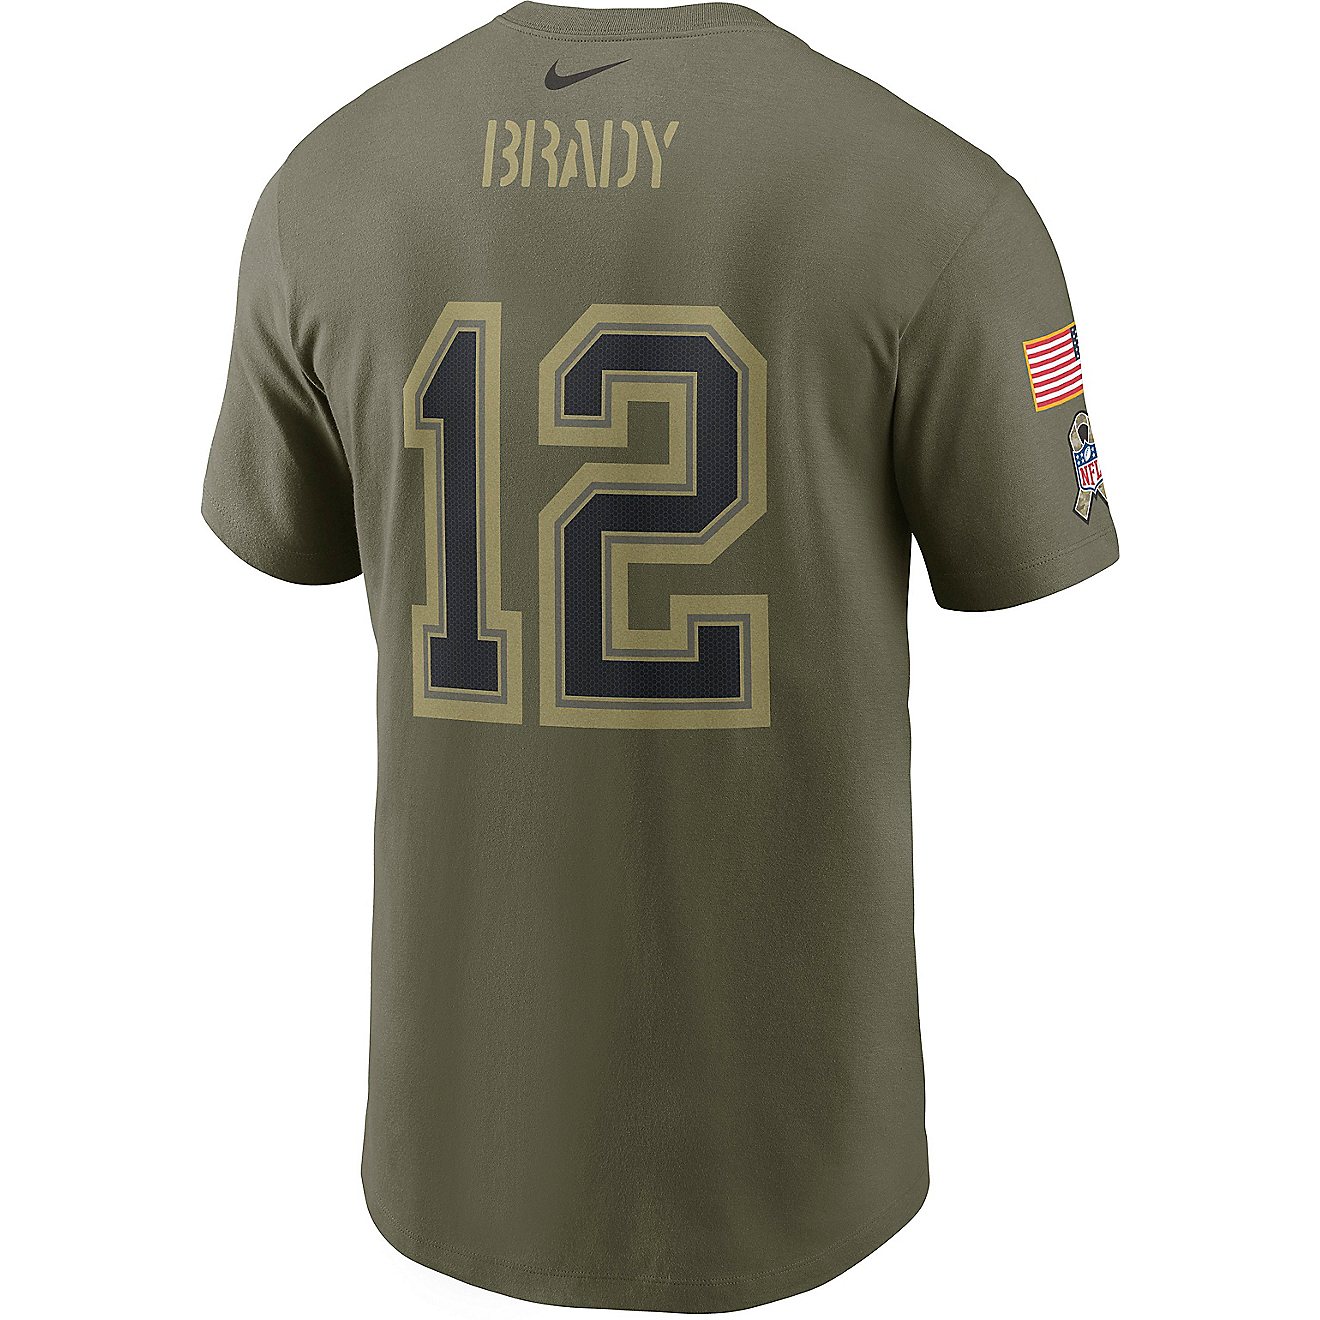 Nike Men's Tampa Bay Buccaneers Tom Brady #12 Salute to Service Short Sleeve T-shirt                                             - view number 1